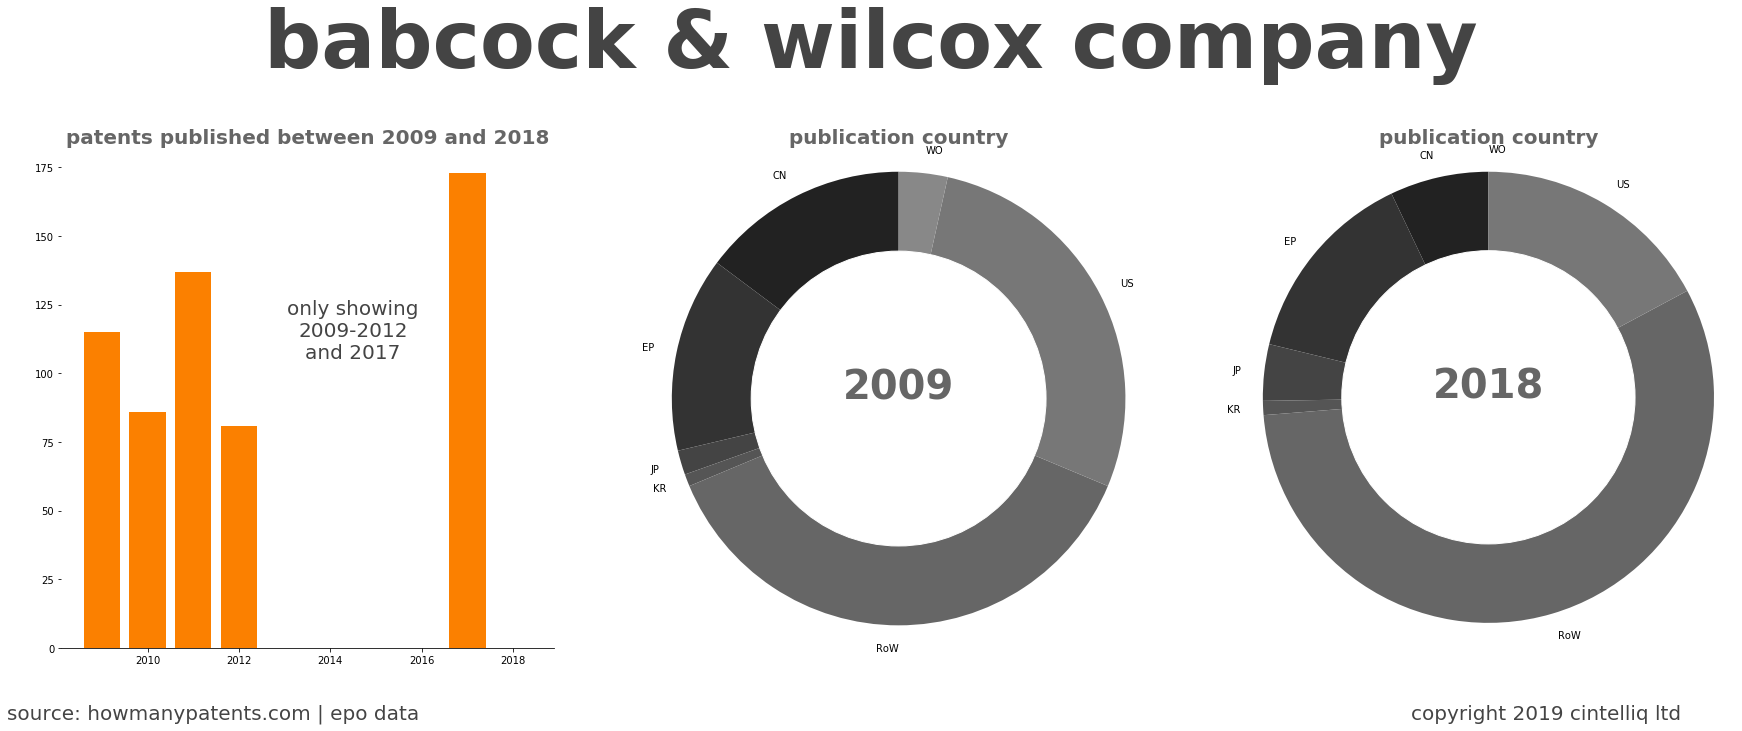 summary of patents for Babcock & Wilcox Company